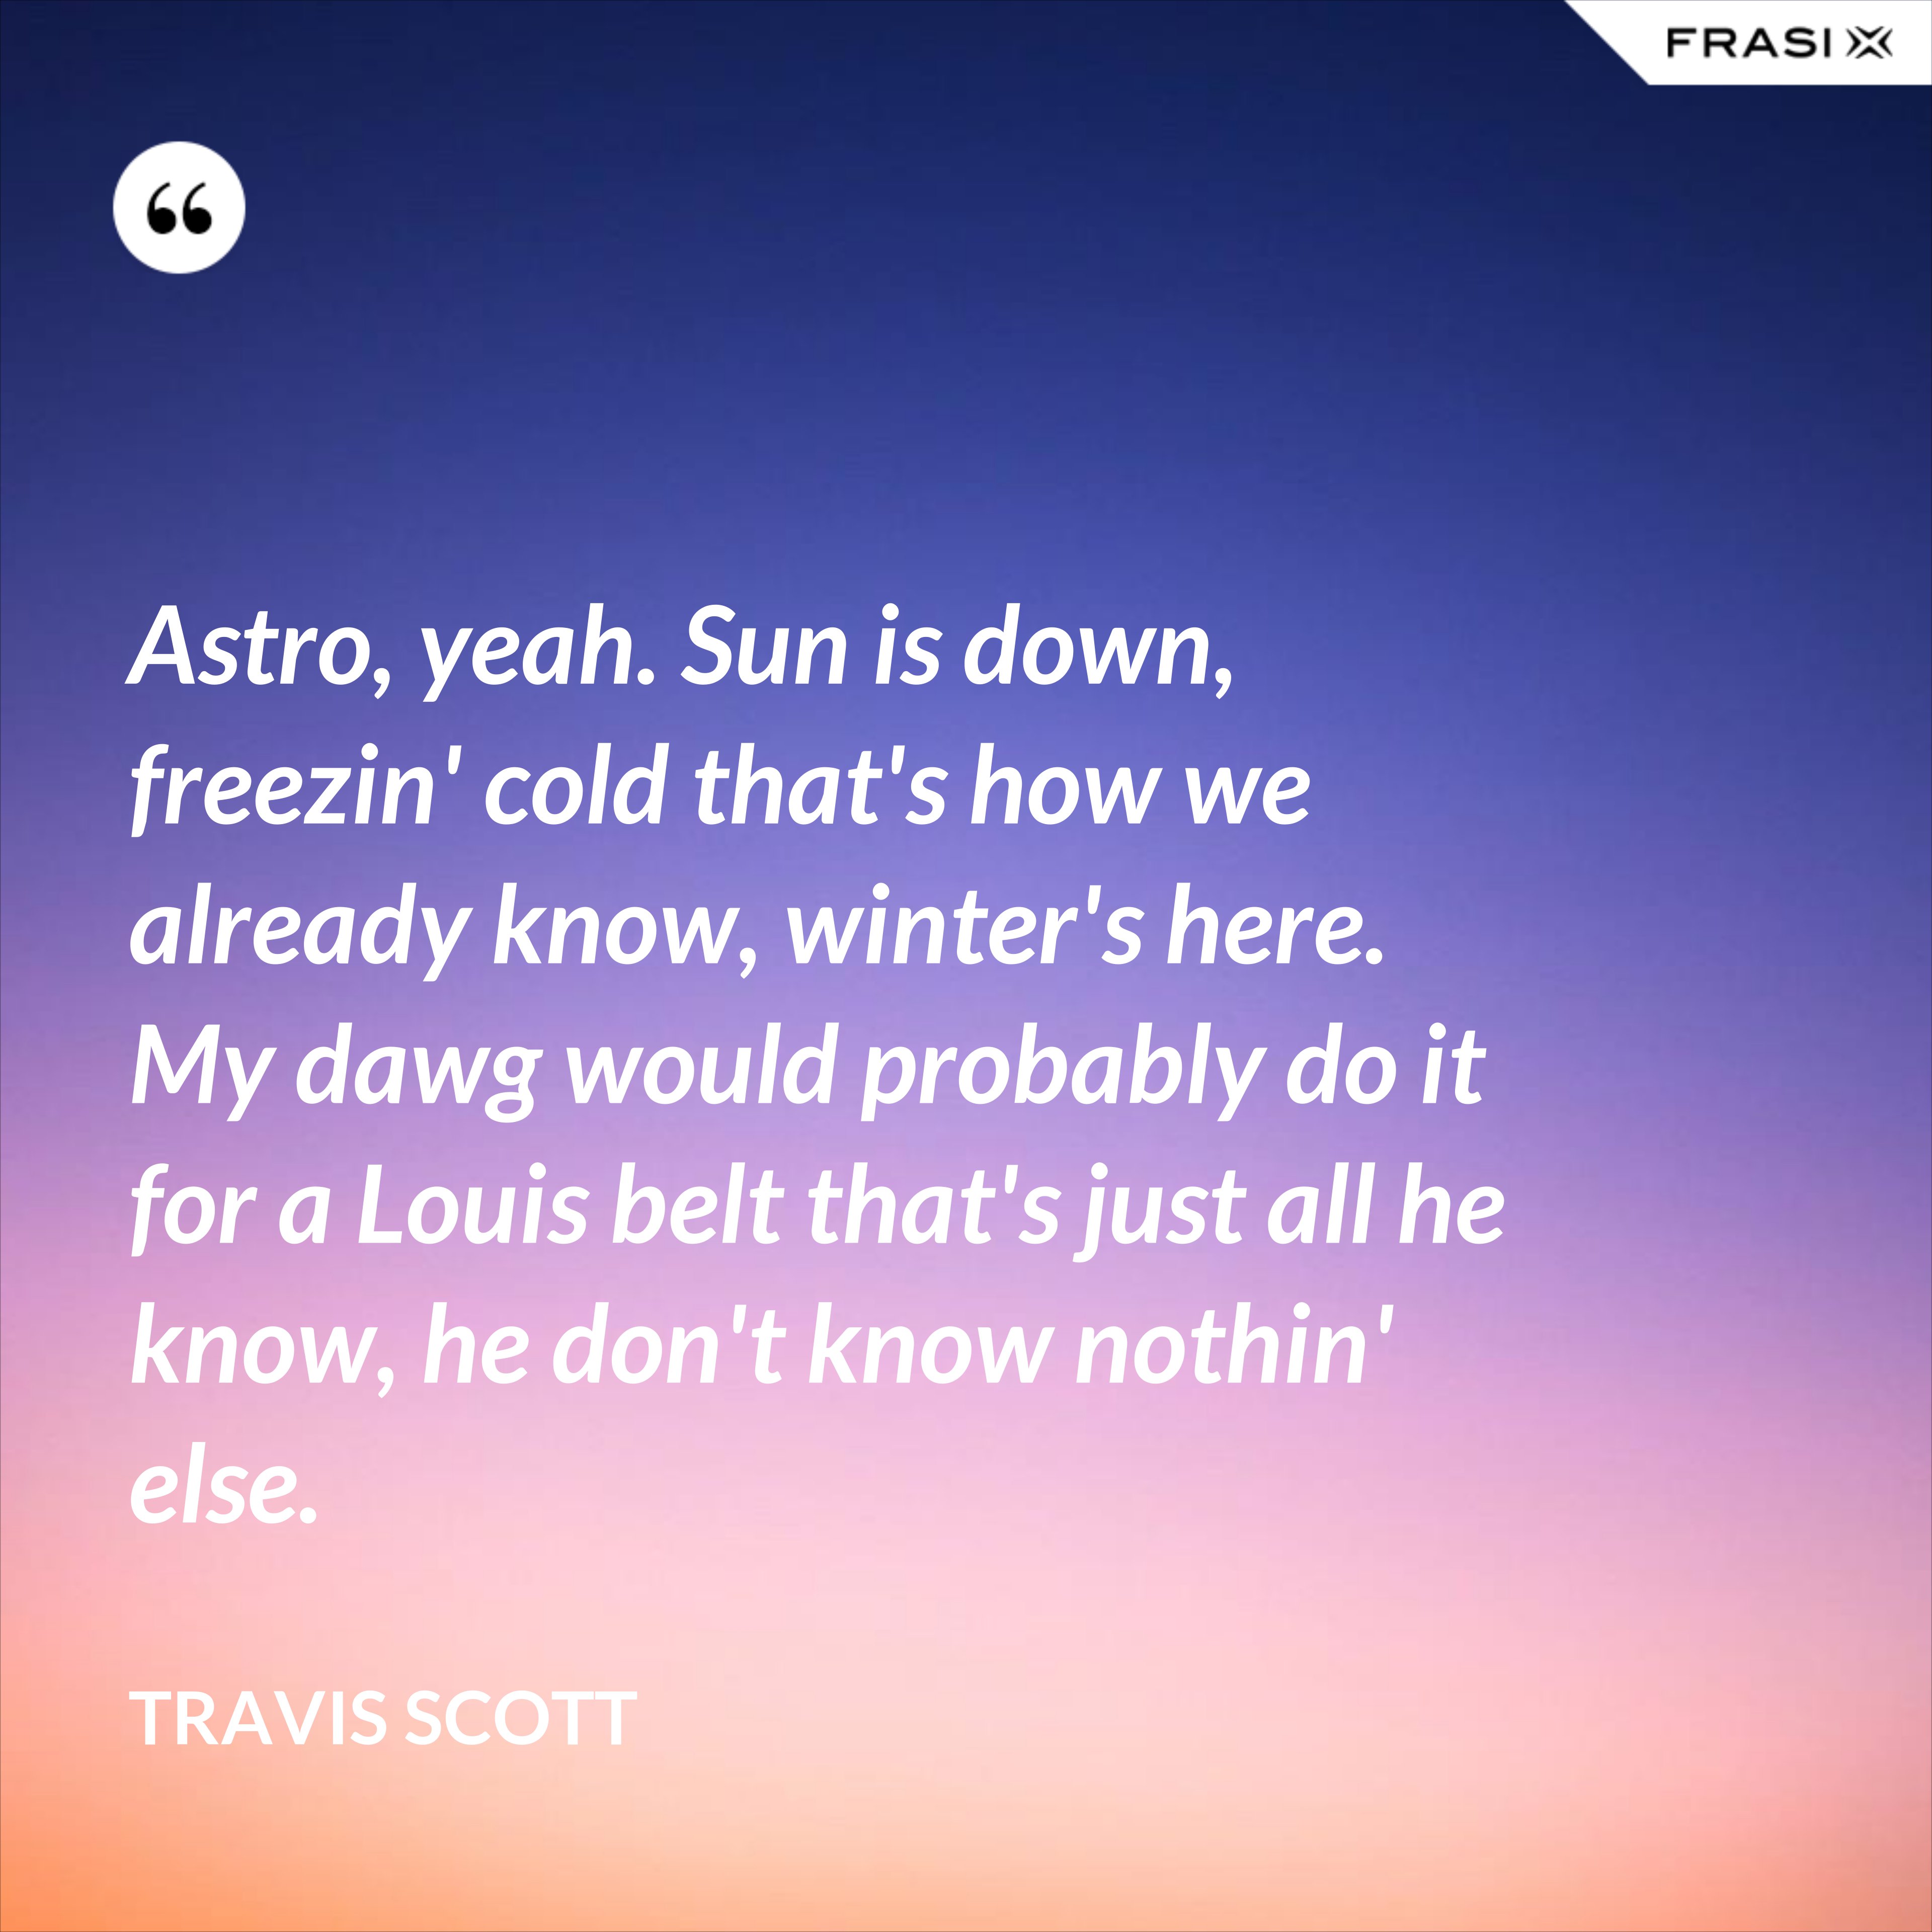 Astro, yeah. Sun is down, freezin' cold that's how we already know, winter's here. My dawg would probably do it for a Louis belt that's just all he know, he don't know nothin' else. - Travis Scott